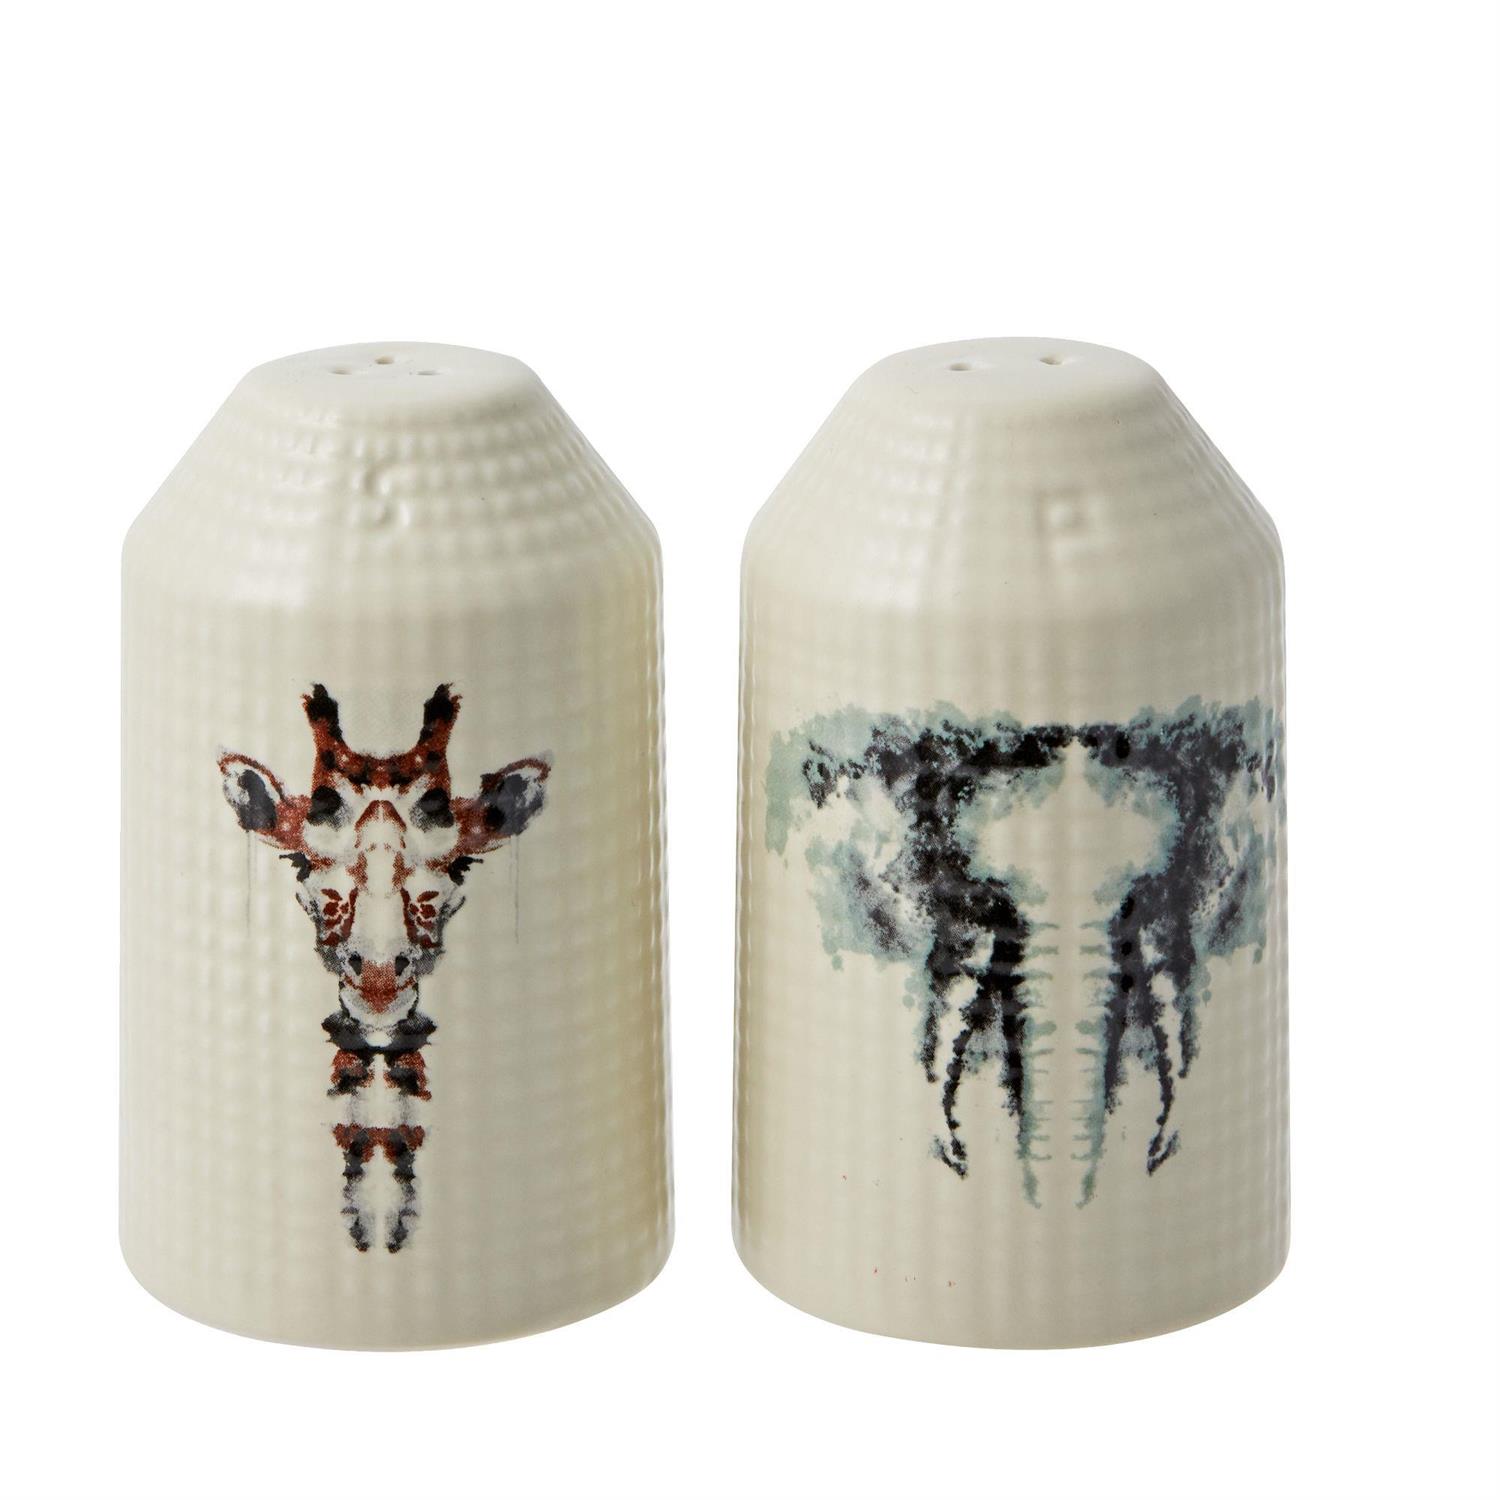 Enesco Gifts Jim Shore Animal Planet Giraffe And Elephant Salt And Pepper Set Free Shipping Iveys Gifts And Decor